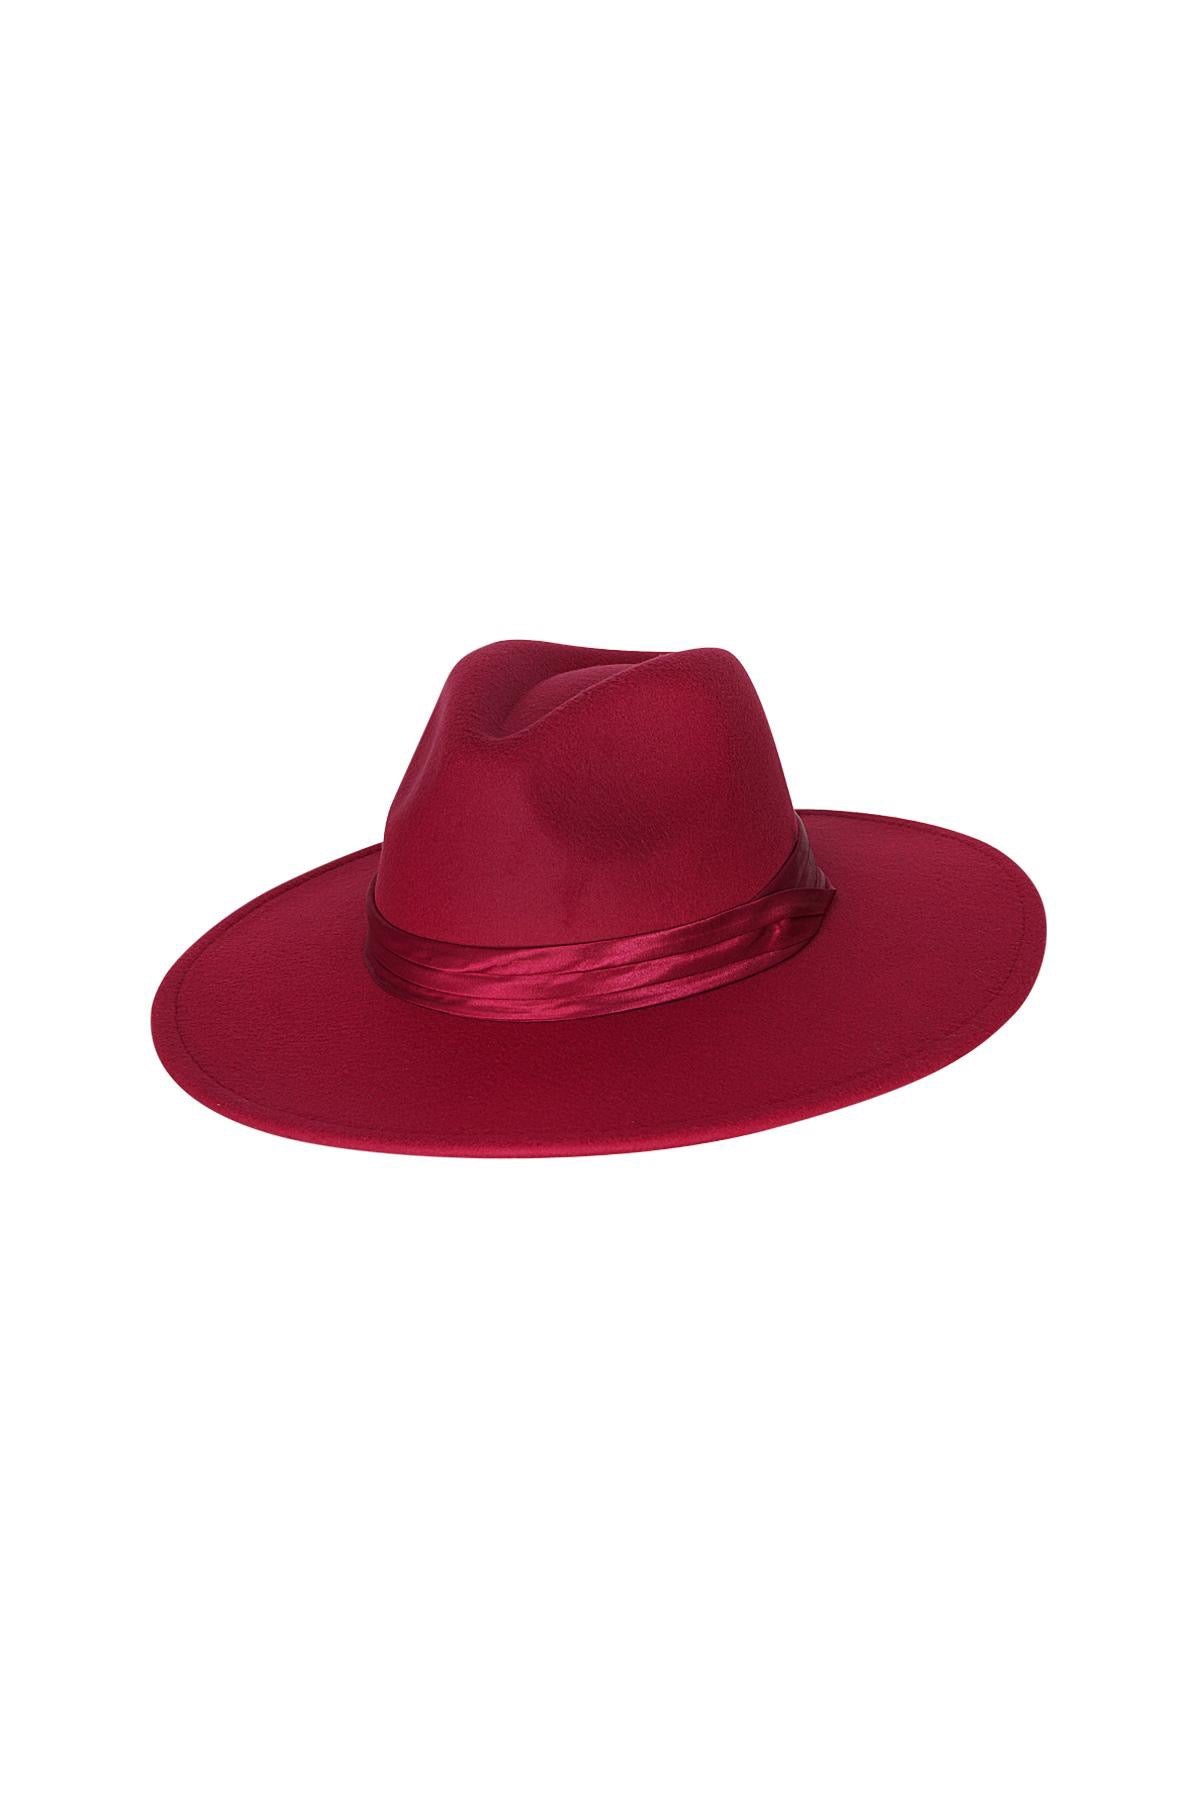 The Country Hat -Farbe wählbar-